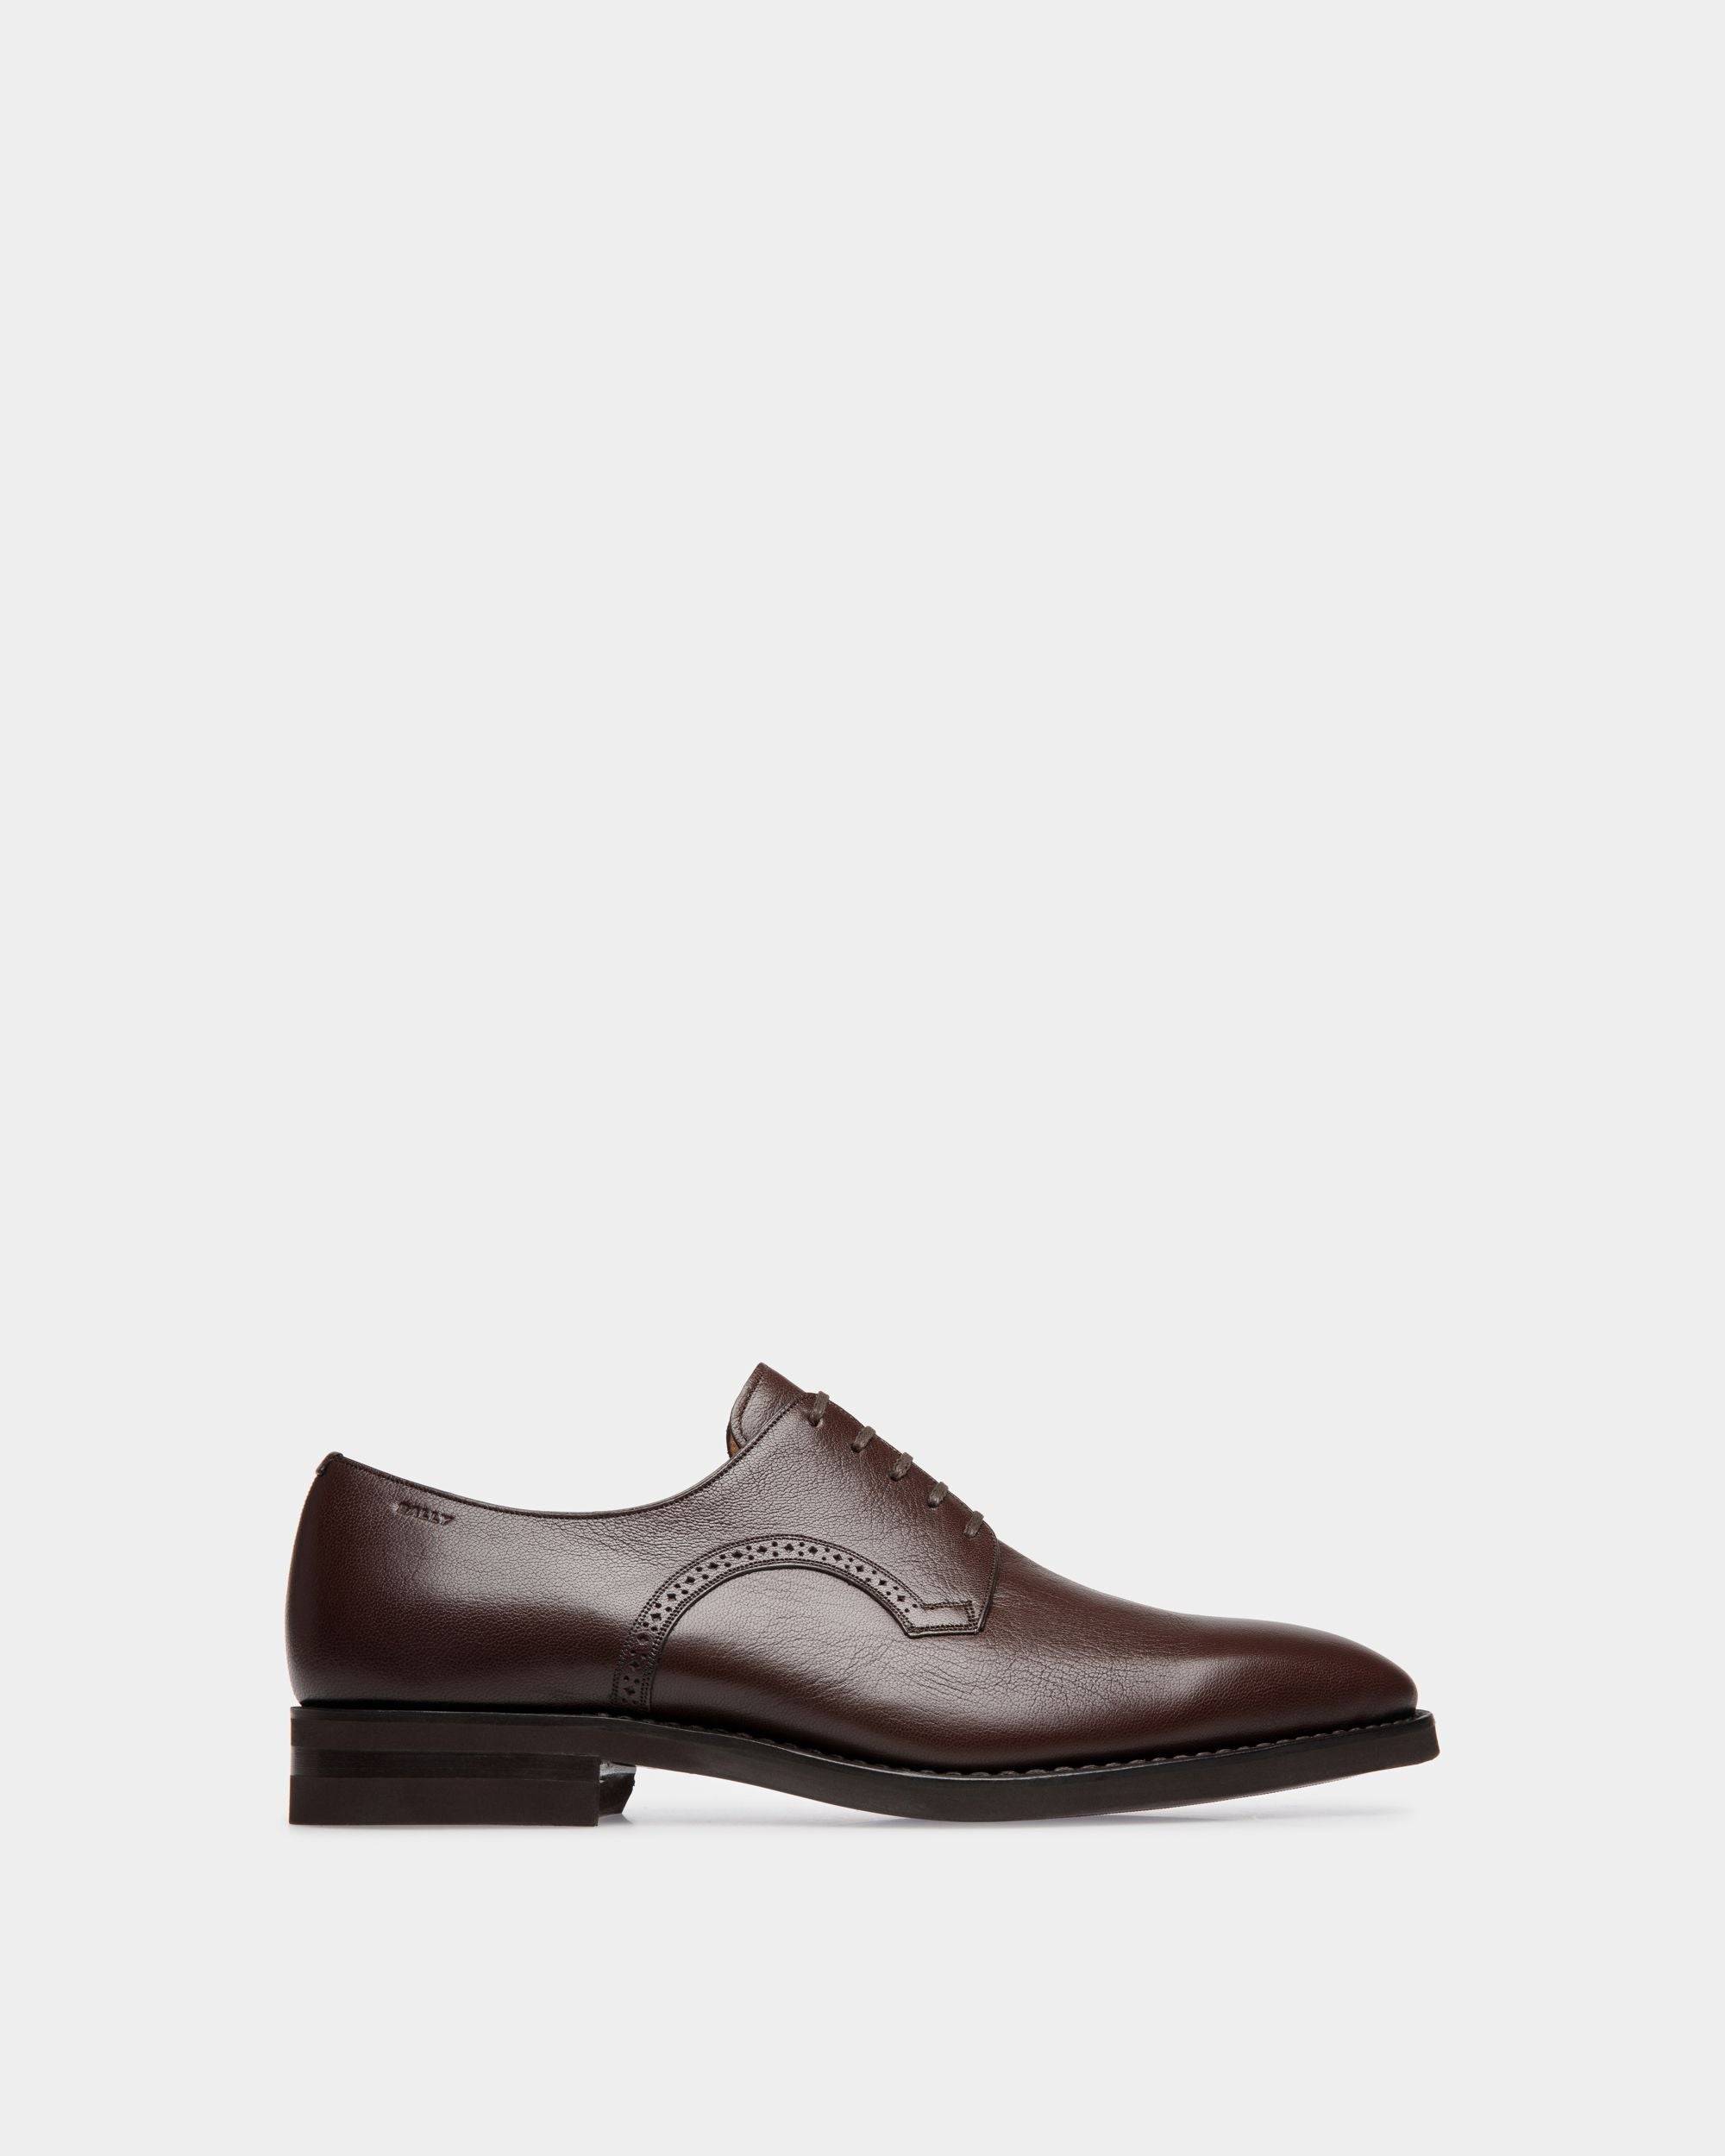 Scribe | Men's Derby in Brown Grained Leather | Bally | Still Life Side